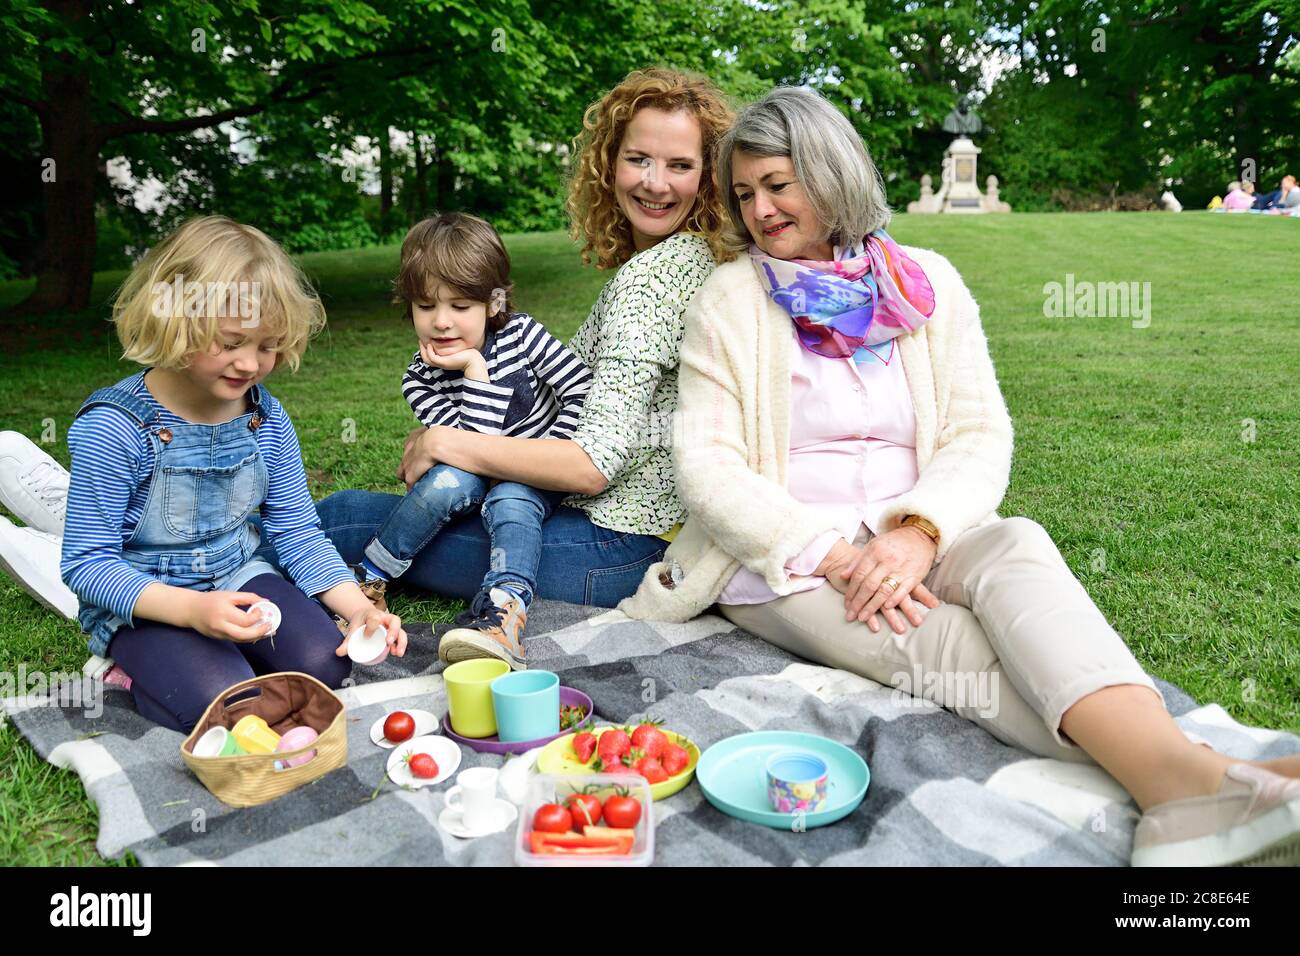 Happy children enjoying picnic with mother and grandmother at public park Stock Photo